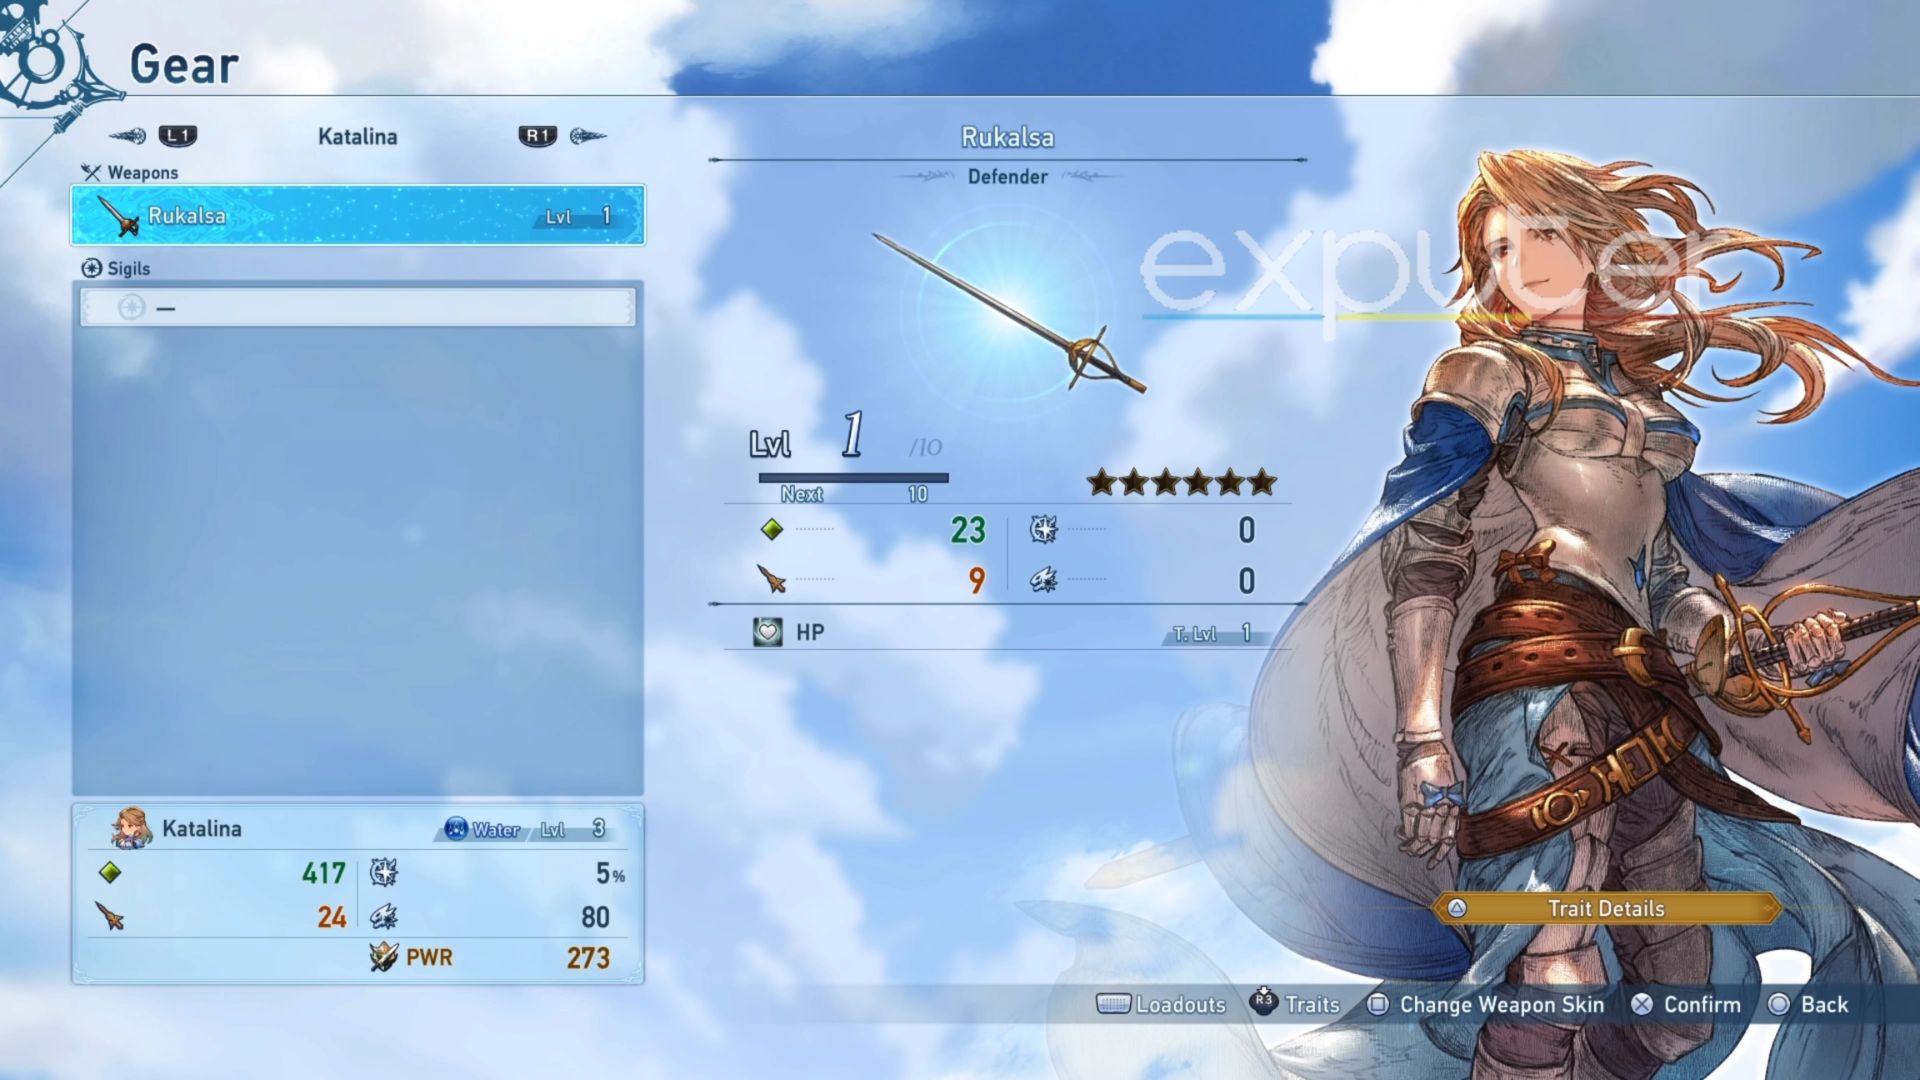 Katalina Weapons In GFR